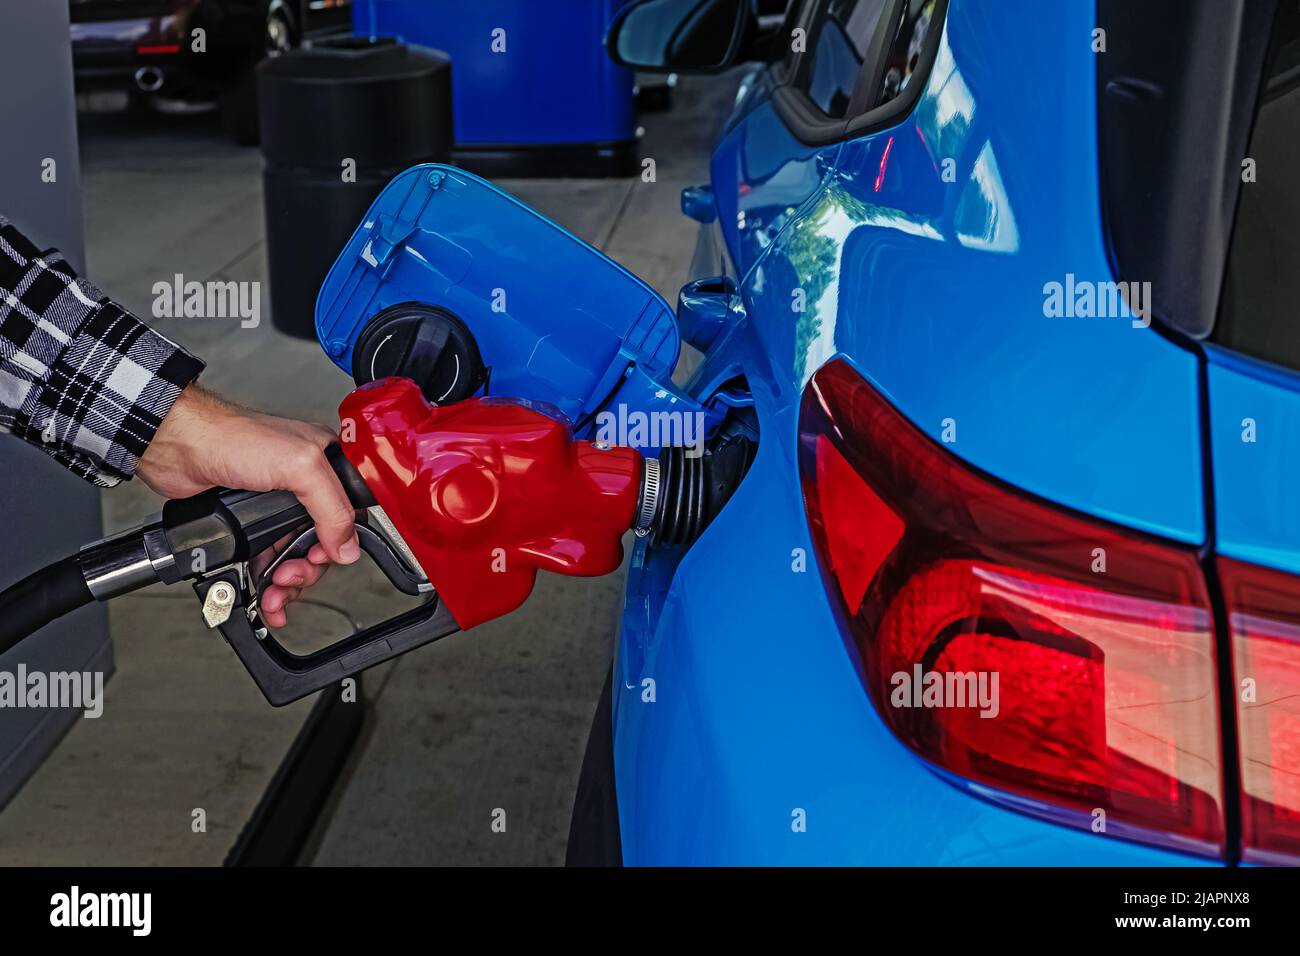 Male hand holding pump filling gasoline into the car, close-up shot. Car refuel, gas price concept Stock Photo